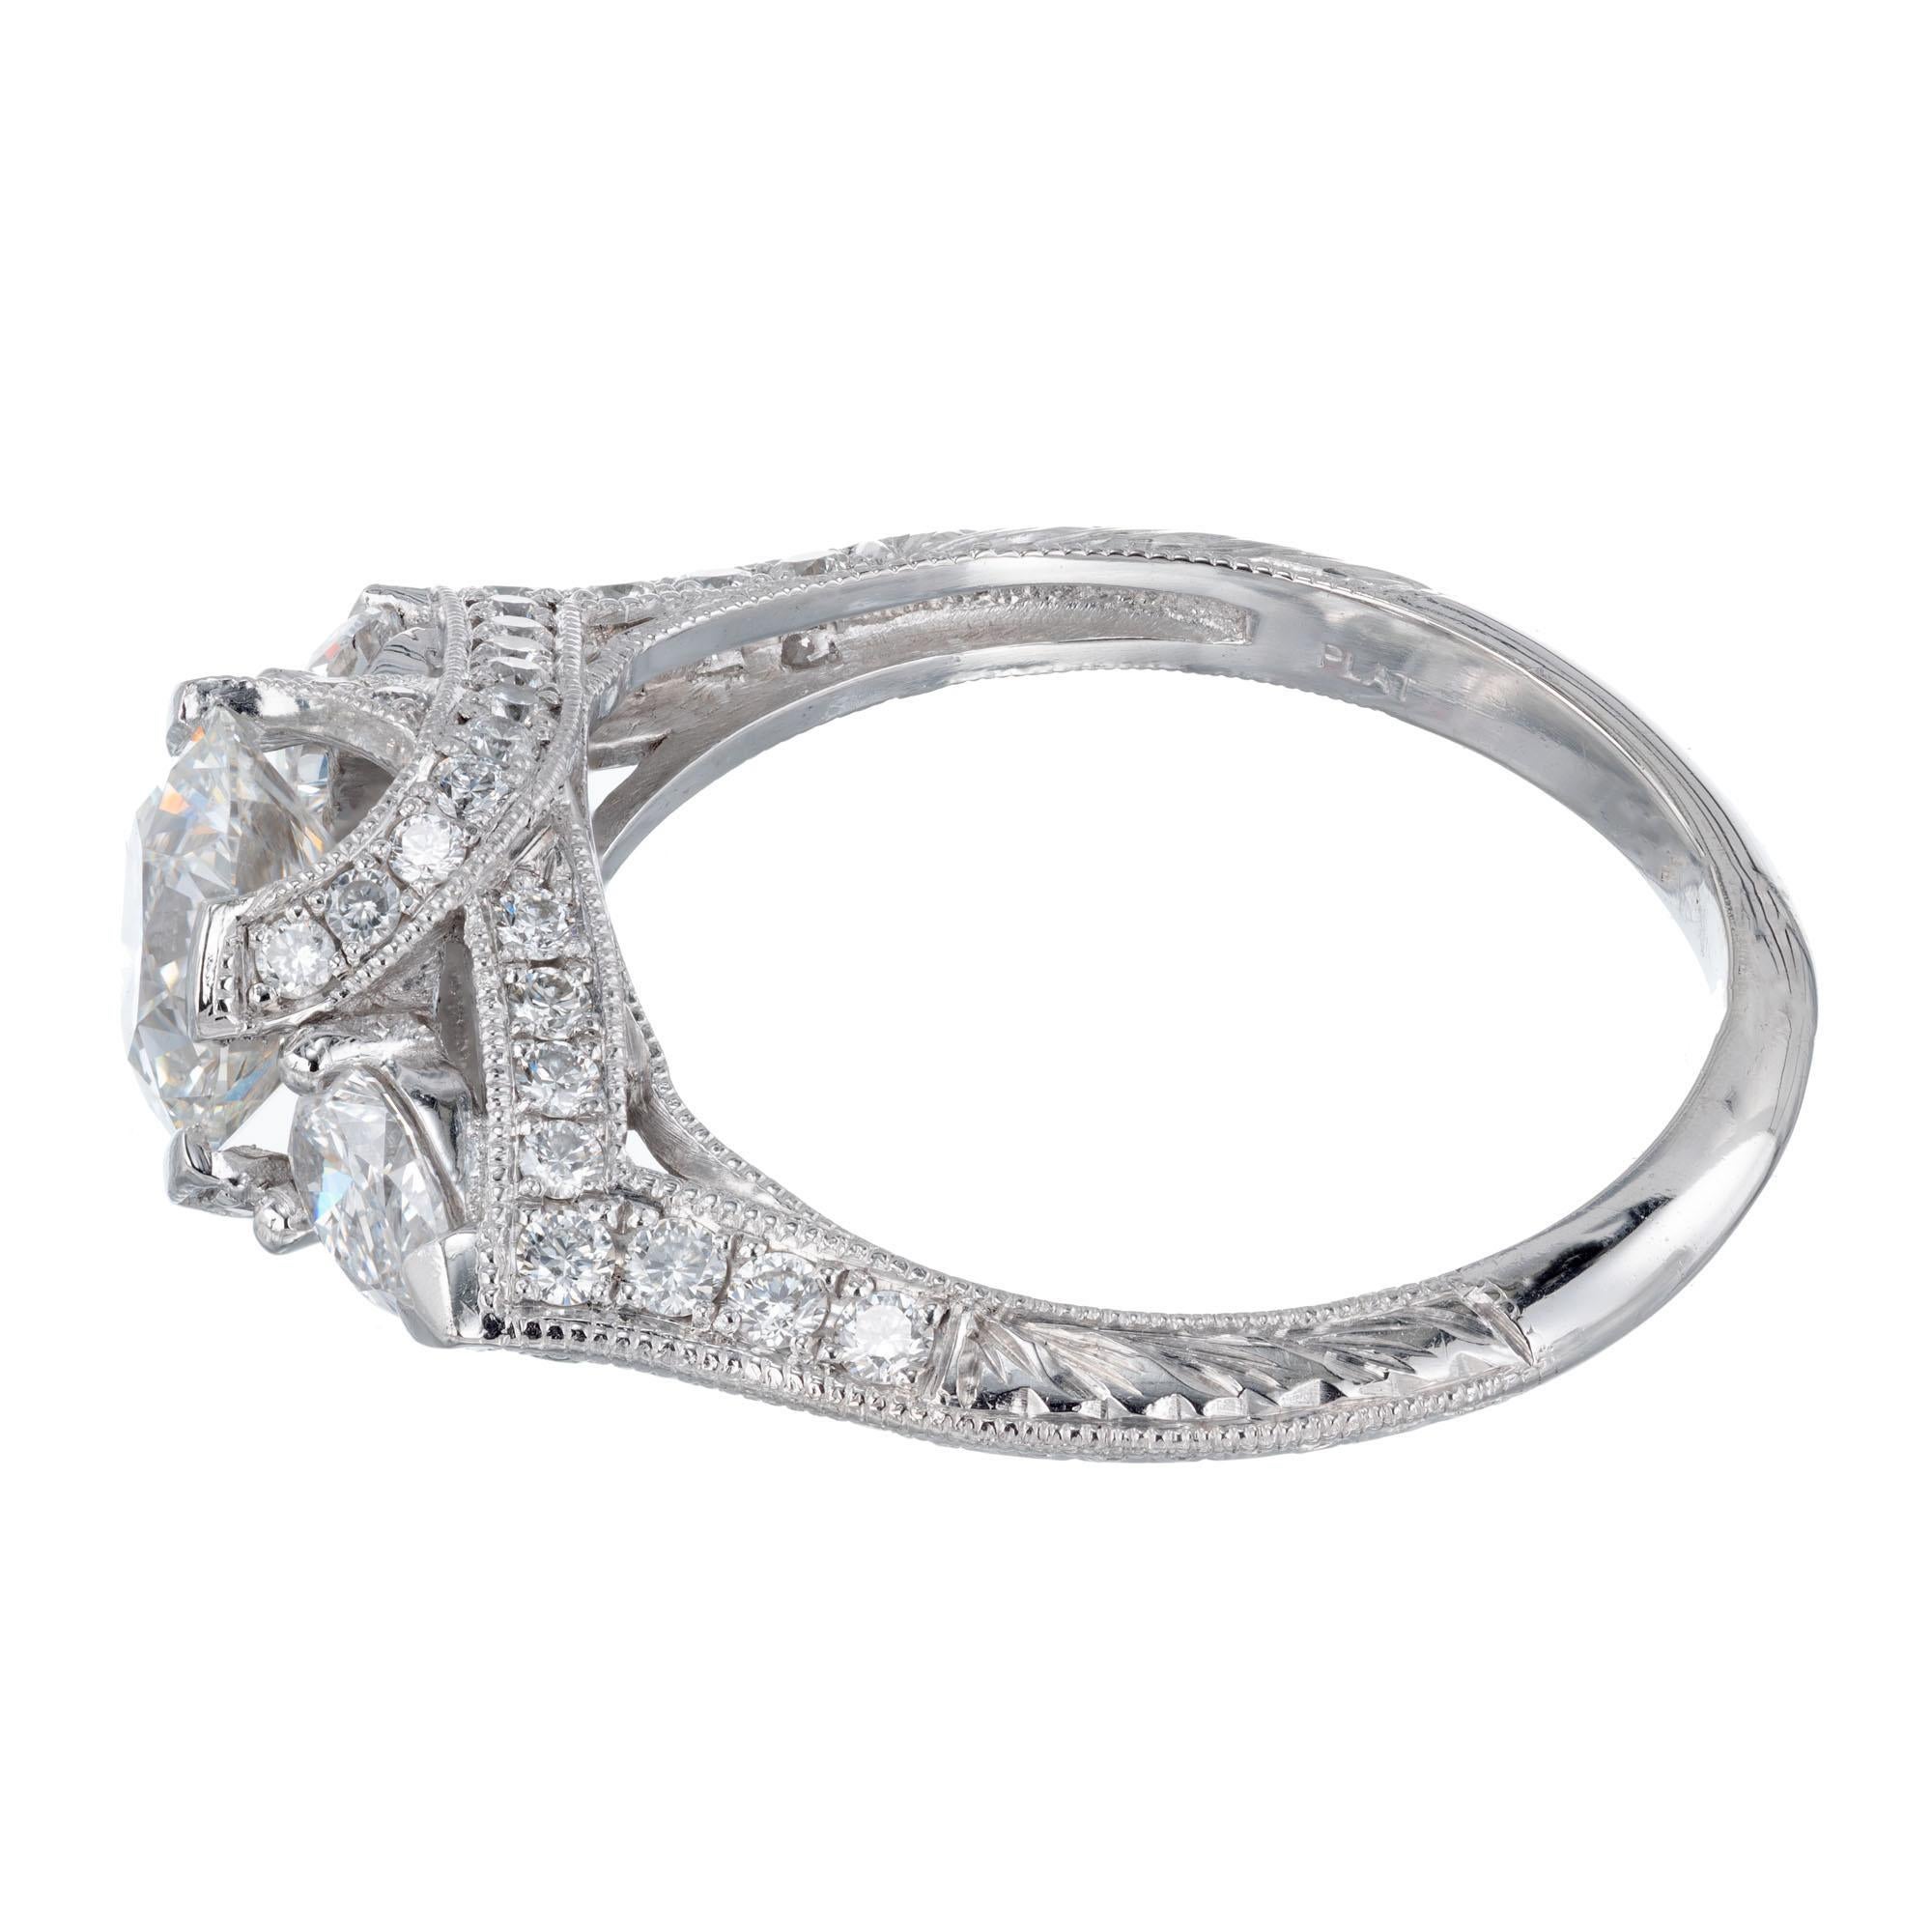 Peter Suchy GIA 1.05 Carat Round Diamond Platinum Three-Stone Engagement Ring In New Condition For Sale In Stamford, CT